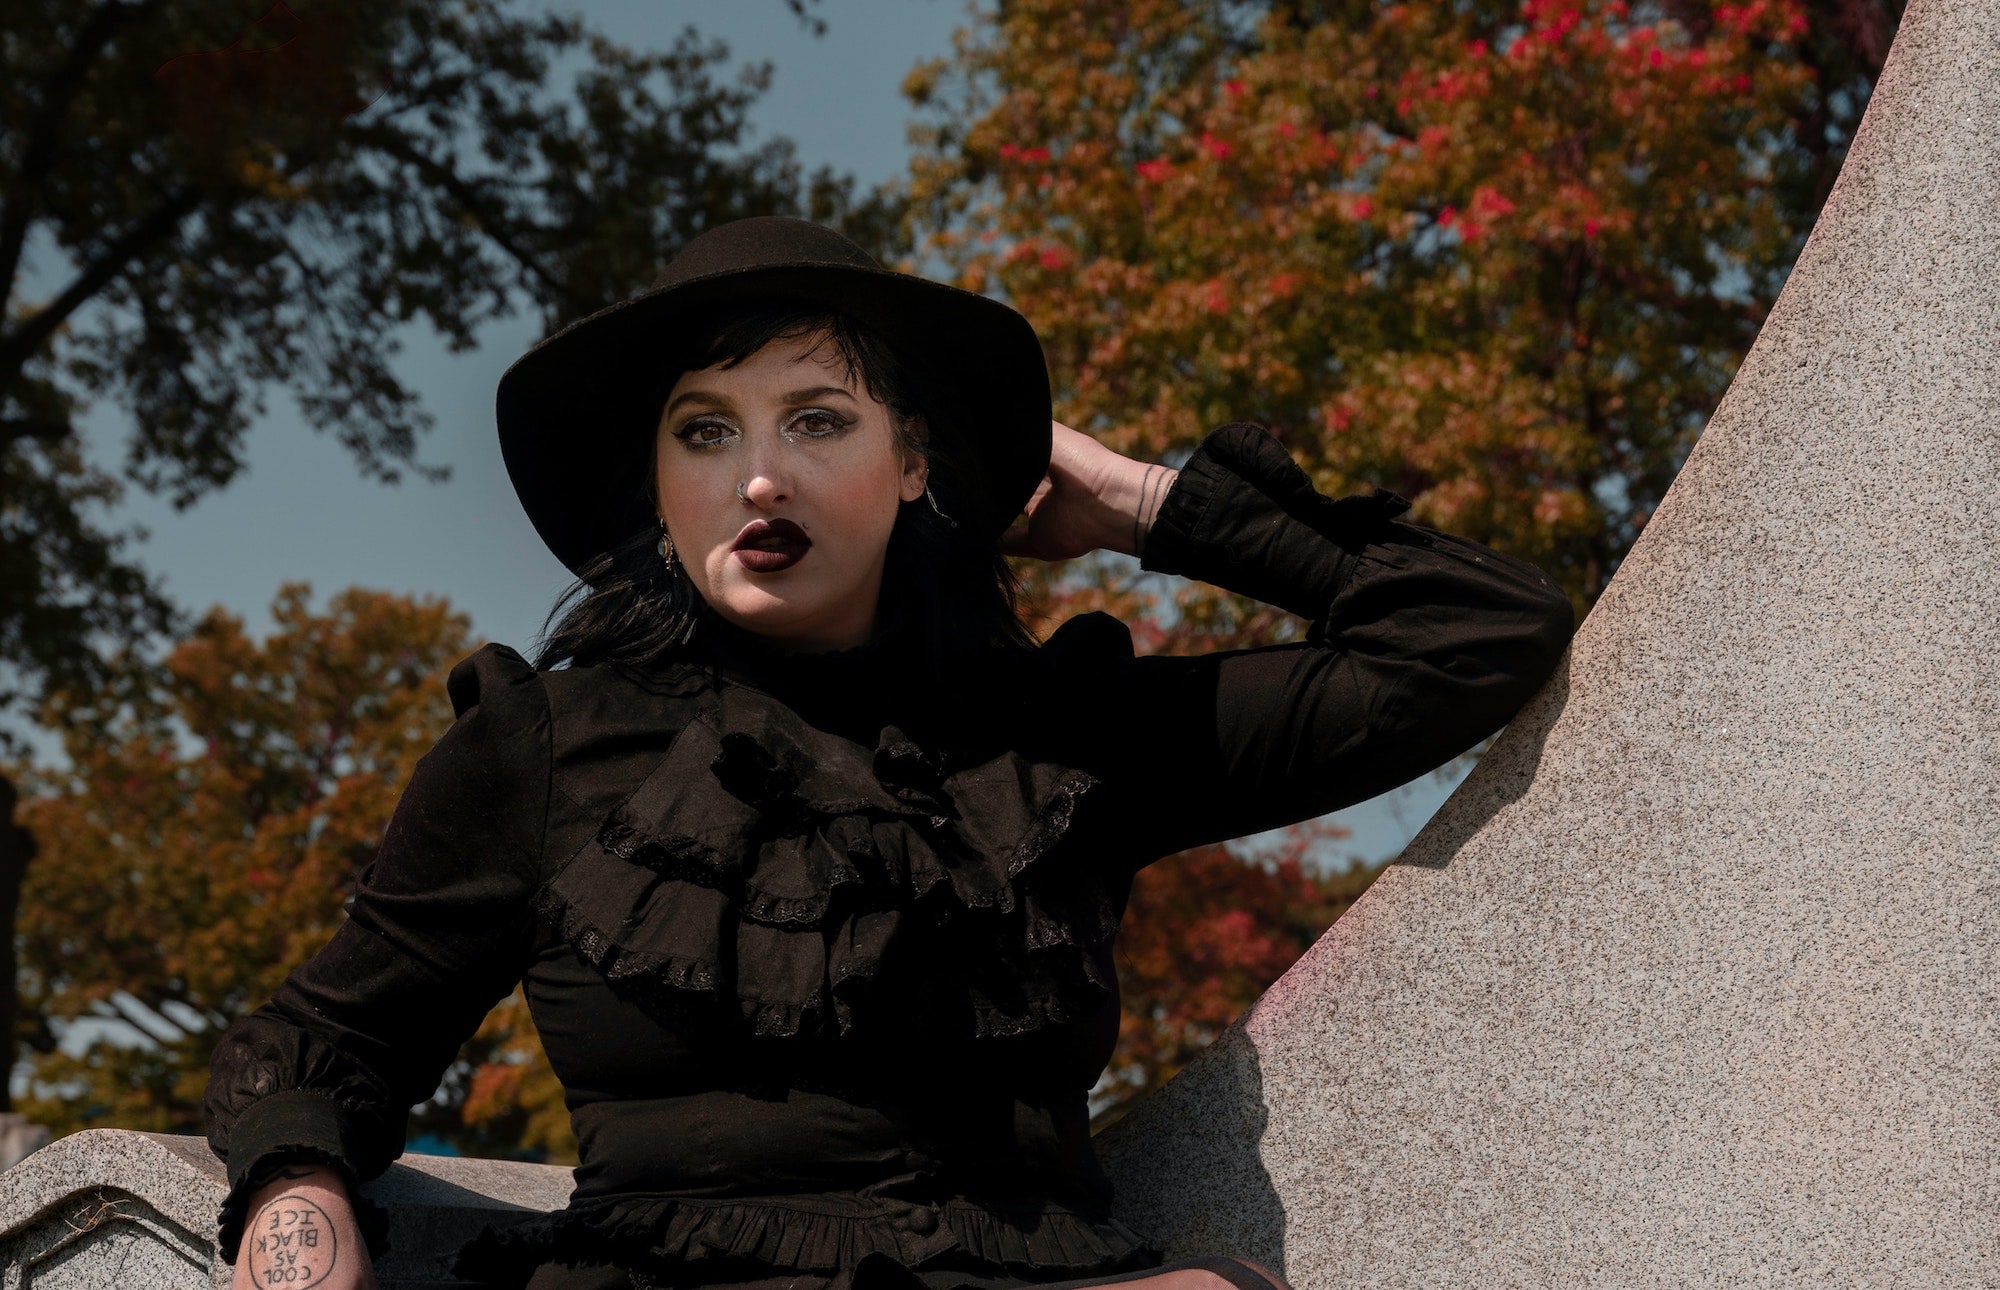 Plus Size Goth Clothing: Where to Find the Best Outfits, Stores, and More